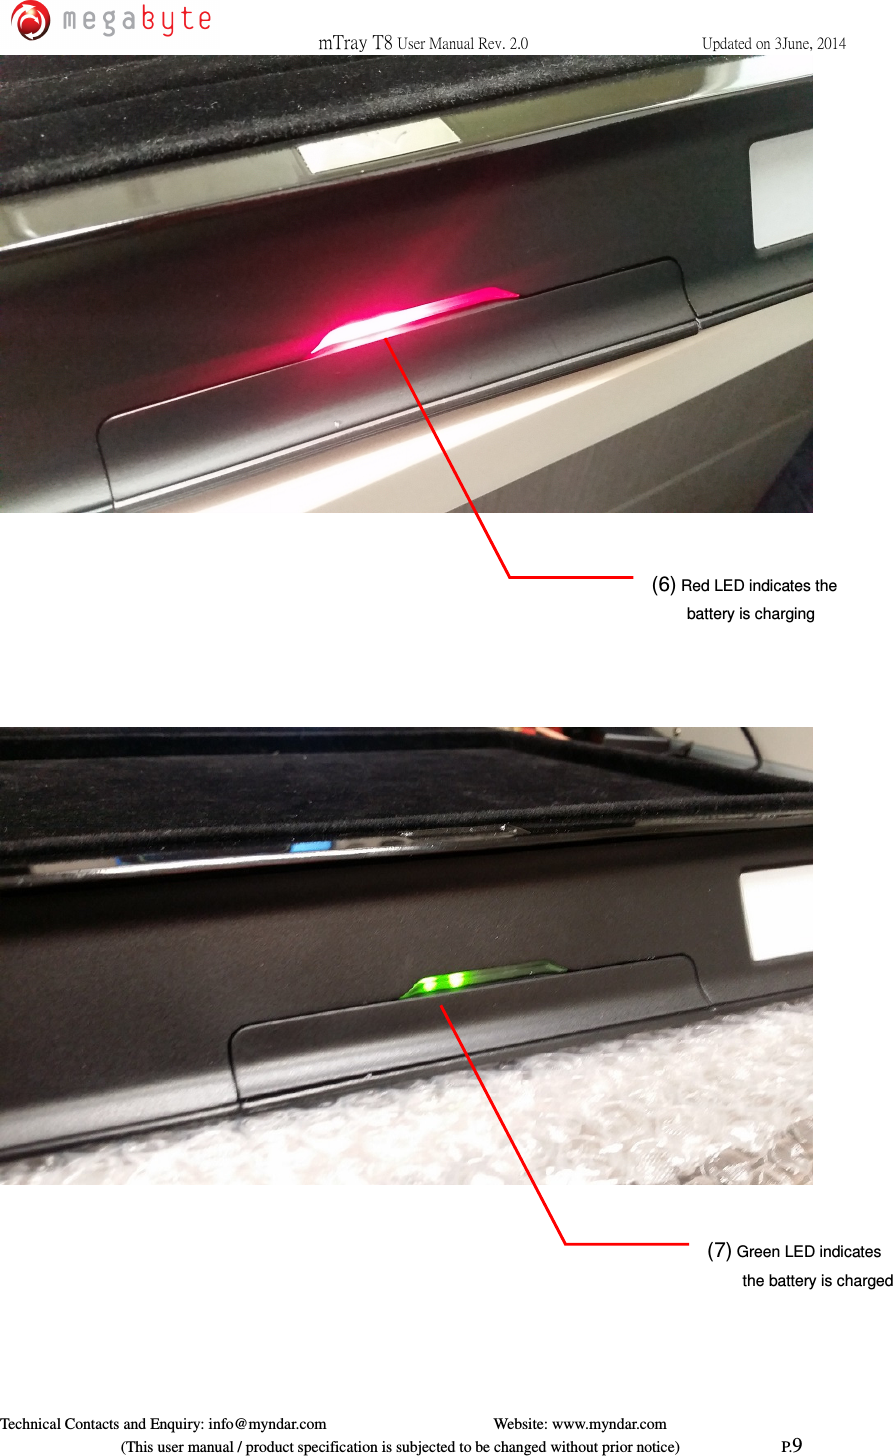  mTray T8 User Manual Rev. 2.0  Updated on 3June, 2014     Technical Contacts and Enquiry: info@myndar.com         Website: www.myndar.com                             (This user manual / product specification is subjected to be changed without prior notice)                          P.9          (6) Red LED indicates the battery is charging (7) Green LED indicates the battery is charged 